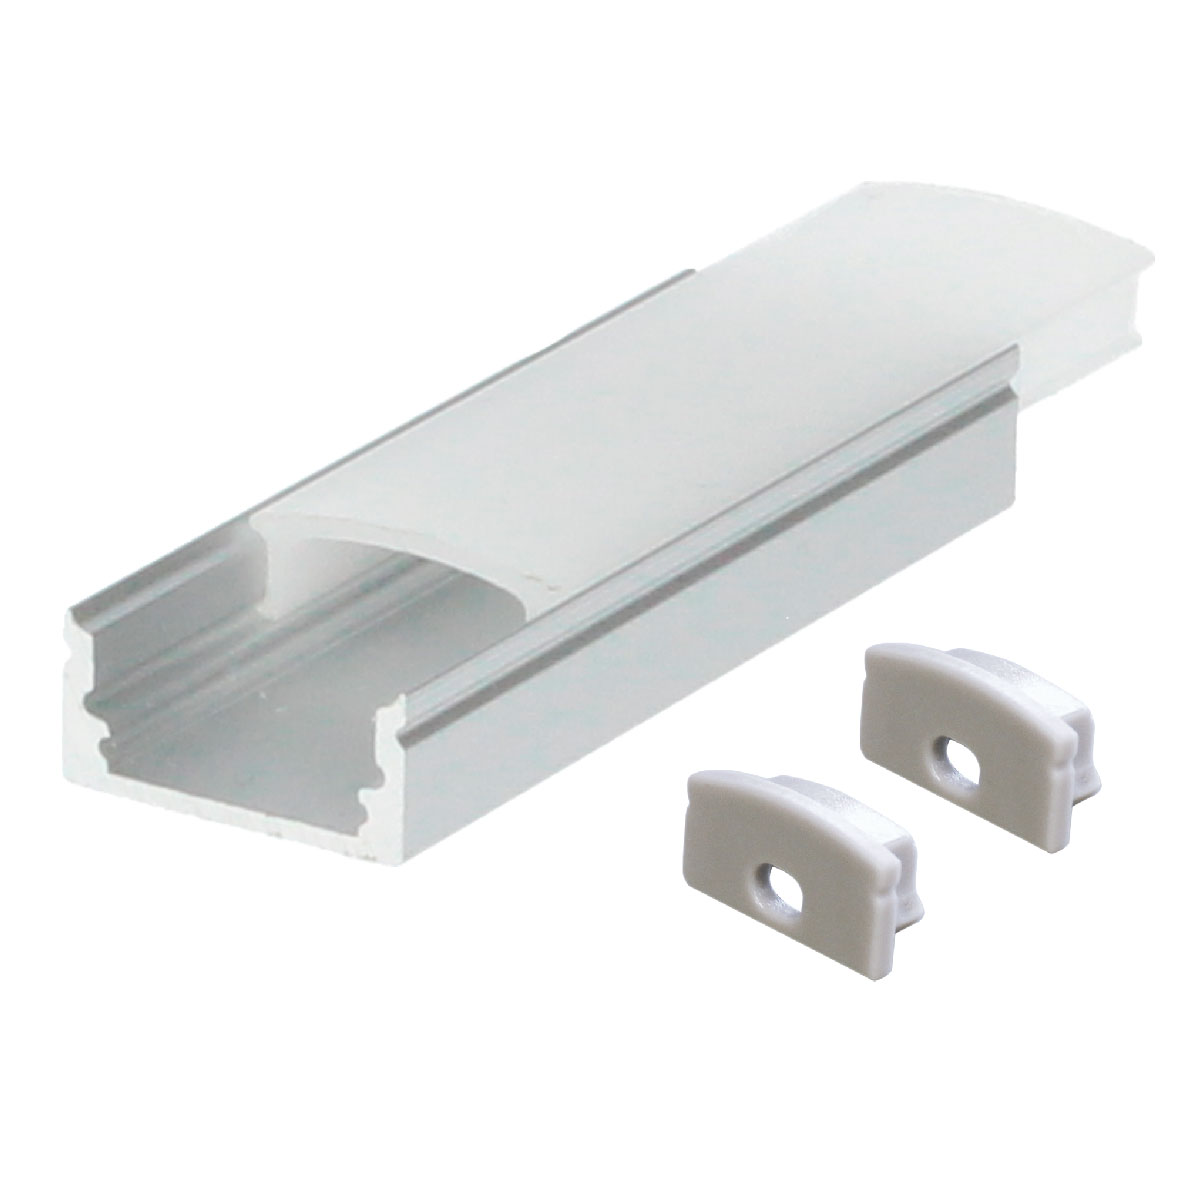 Kit 2M surface aluminum profile for LED strips up to 12mm